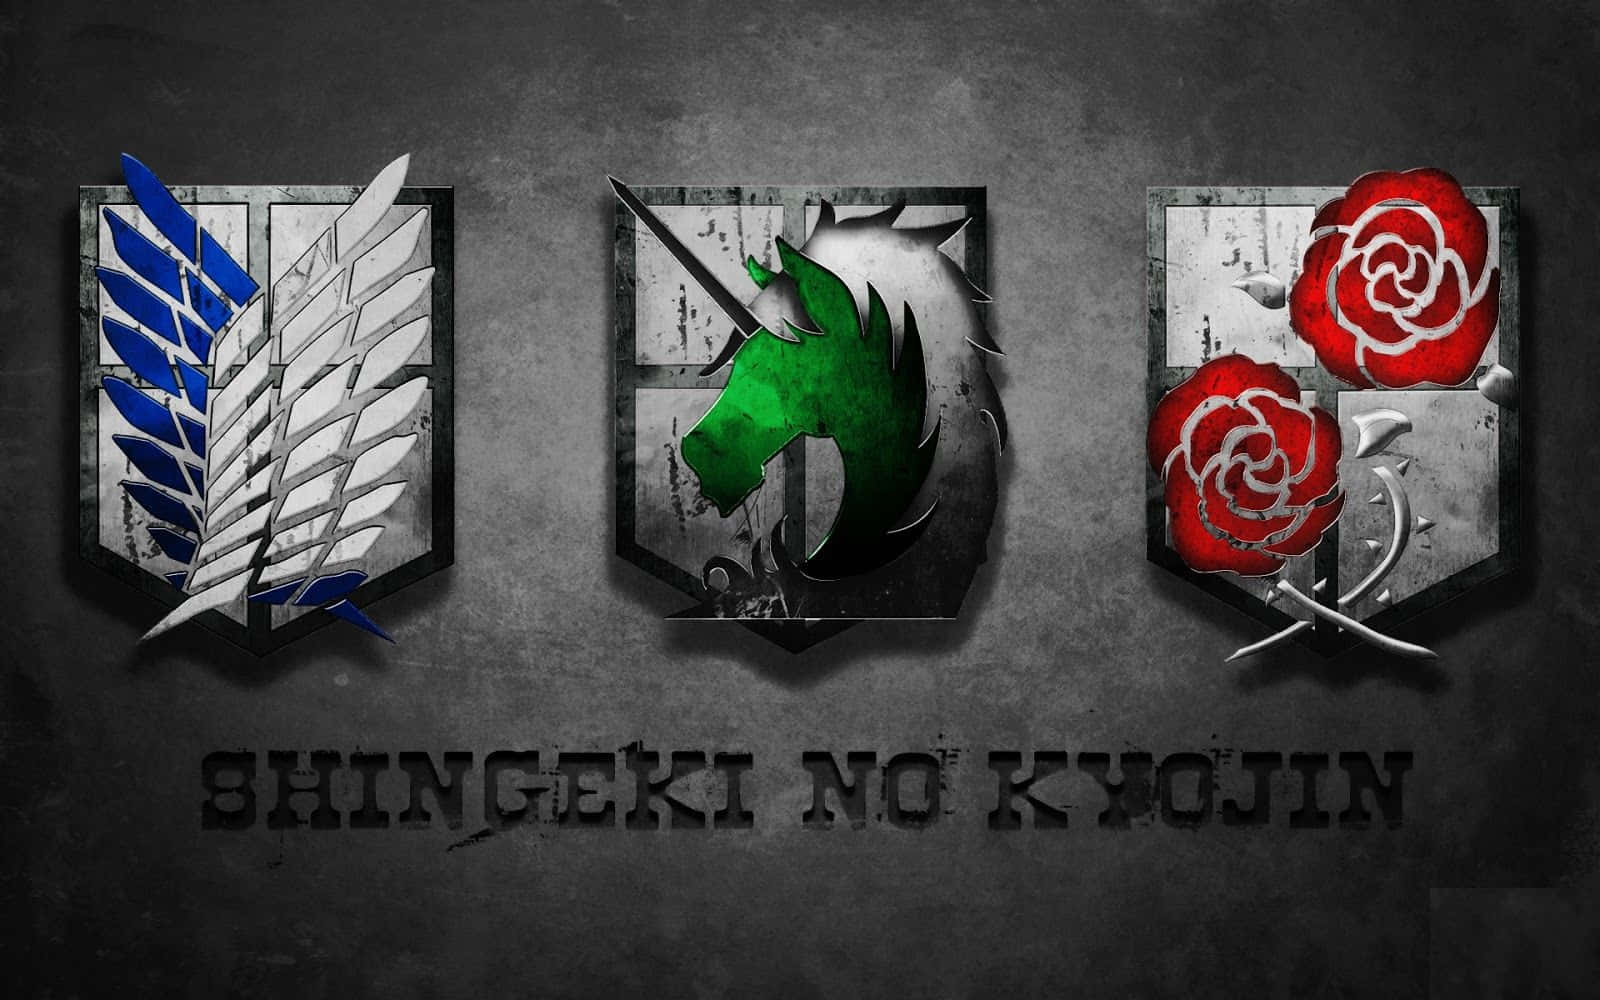 Join the Survey Corps and be part of humanity's future! Wallpaper